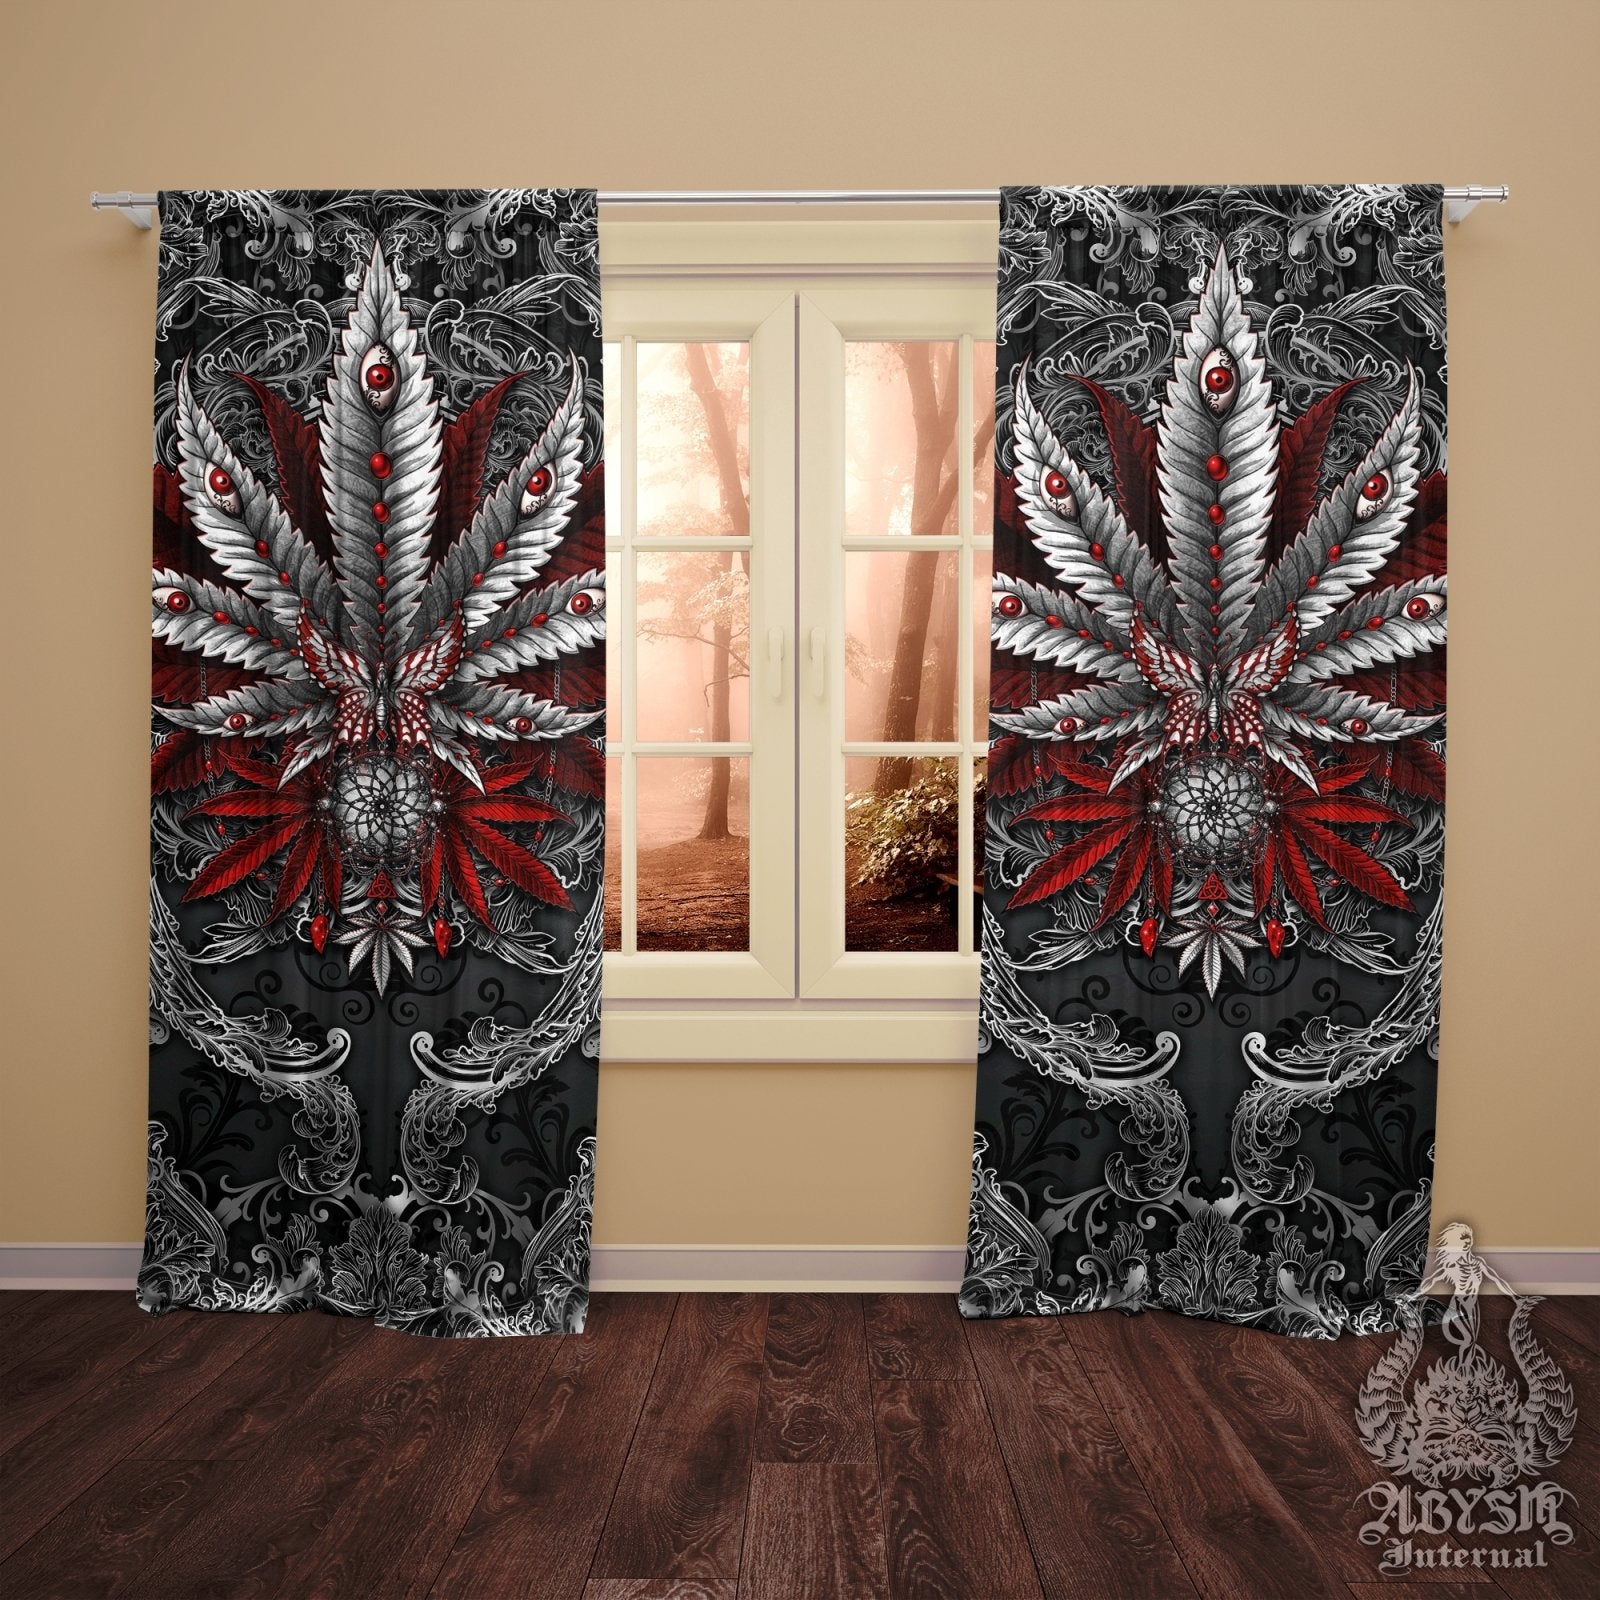 Gothic Weed Blackout Curtains, Cannabis Home and Shop Decor, Long Window Panels, Indie 420 Room Art Print - Dark - Abysm Internal